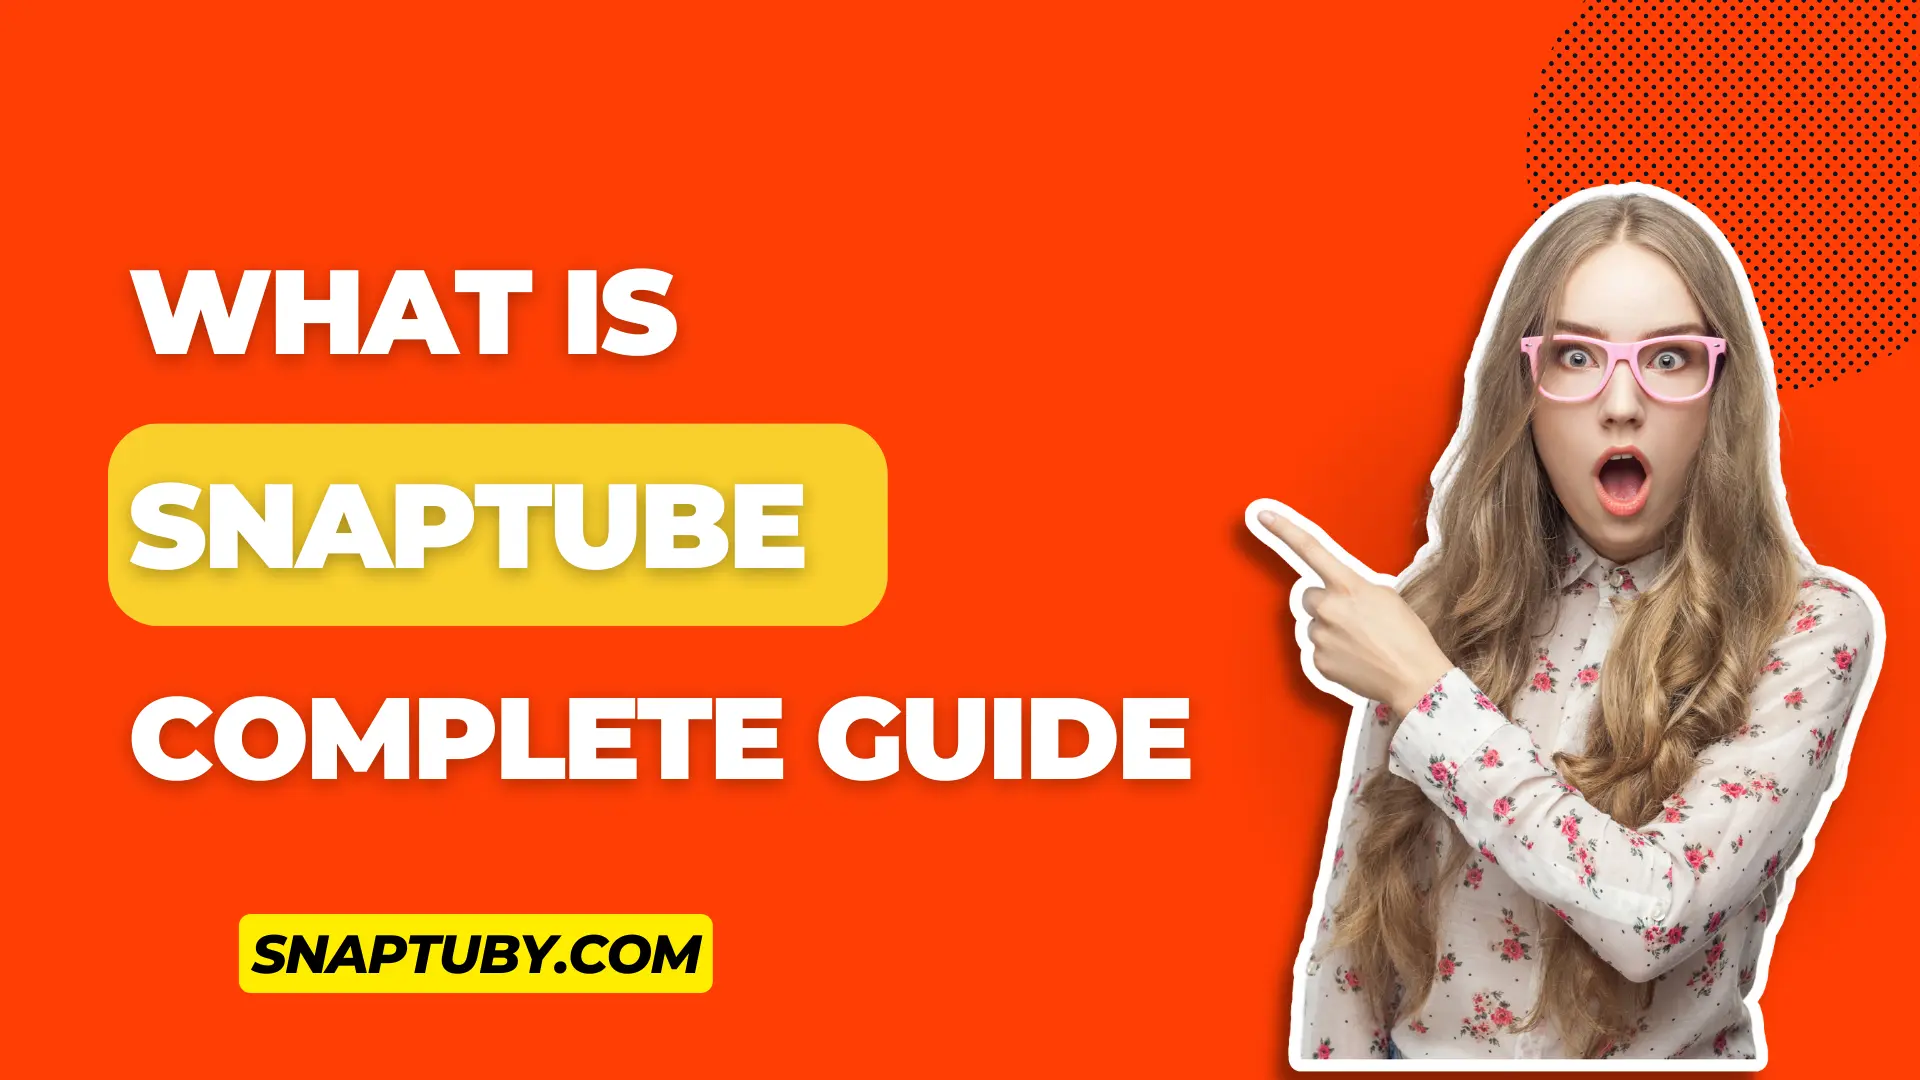 WHAT IS SNAPTUBE-COMPLETE GUIDE